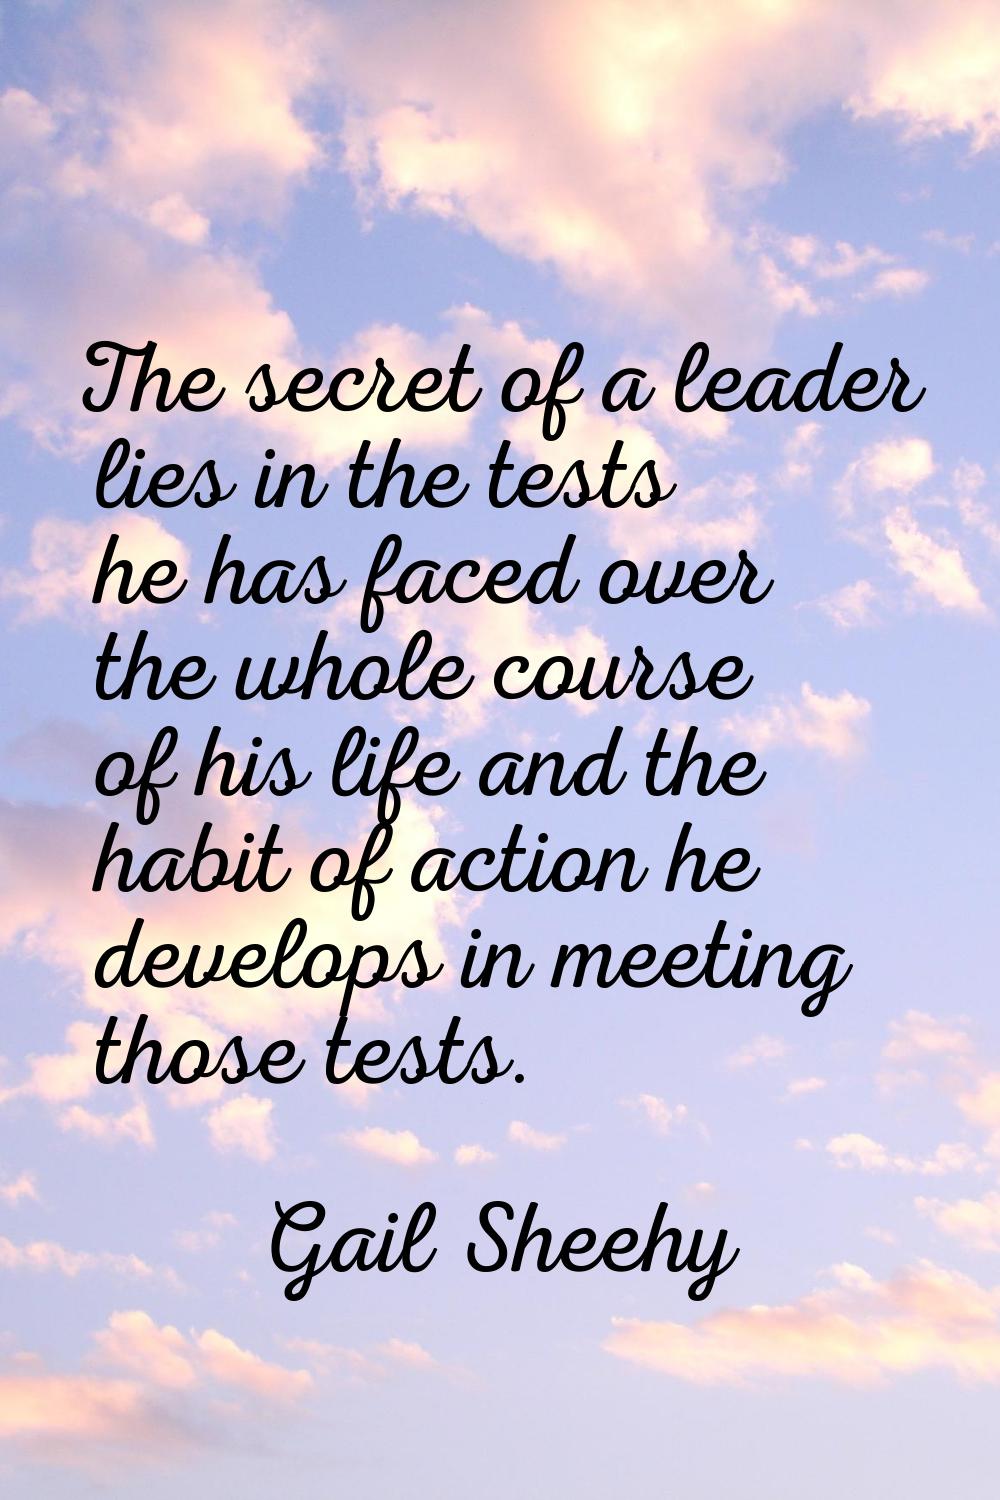 The secret of a leader lies in the tests he has faced over the whole course of his life and the hab